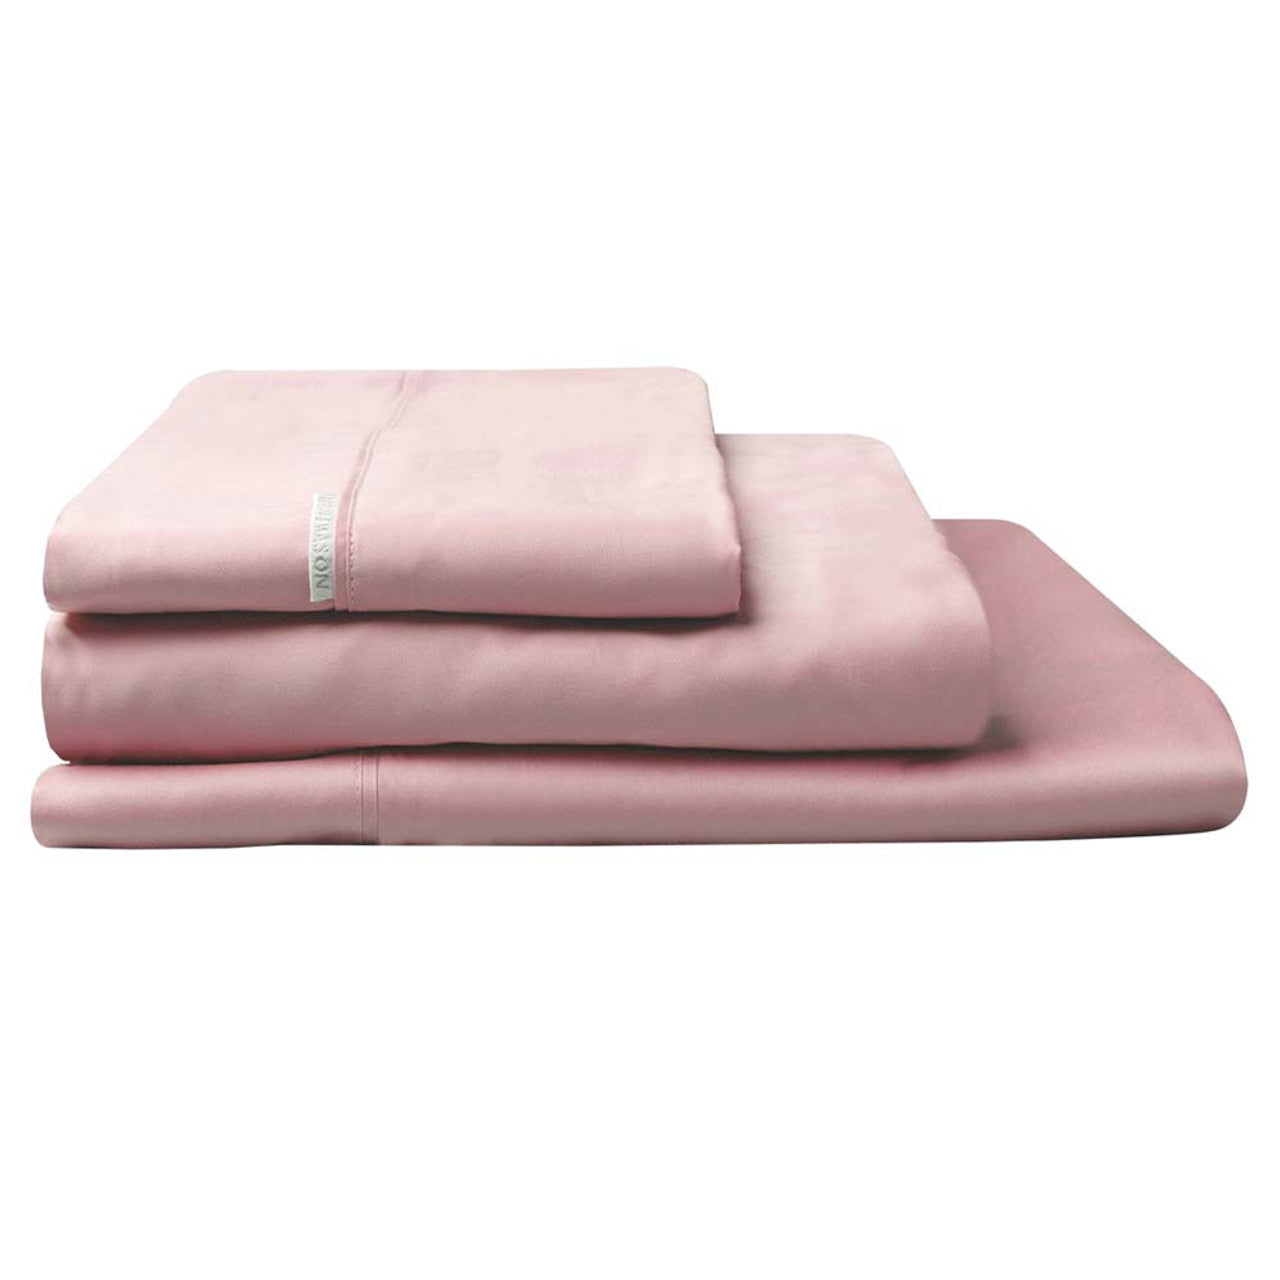 The Logan and Mason 300TC Cotton Percale Dusk Bed Sheet Set is made from cotton, known for its natural breathability. With a strong percale weave, these sheets offer a matte finish and a refreshing, cool sensation that only gets better with each wash.